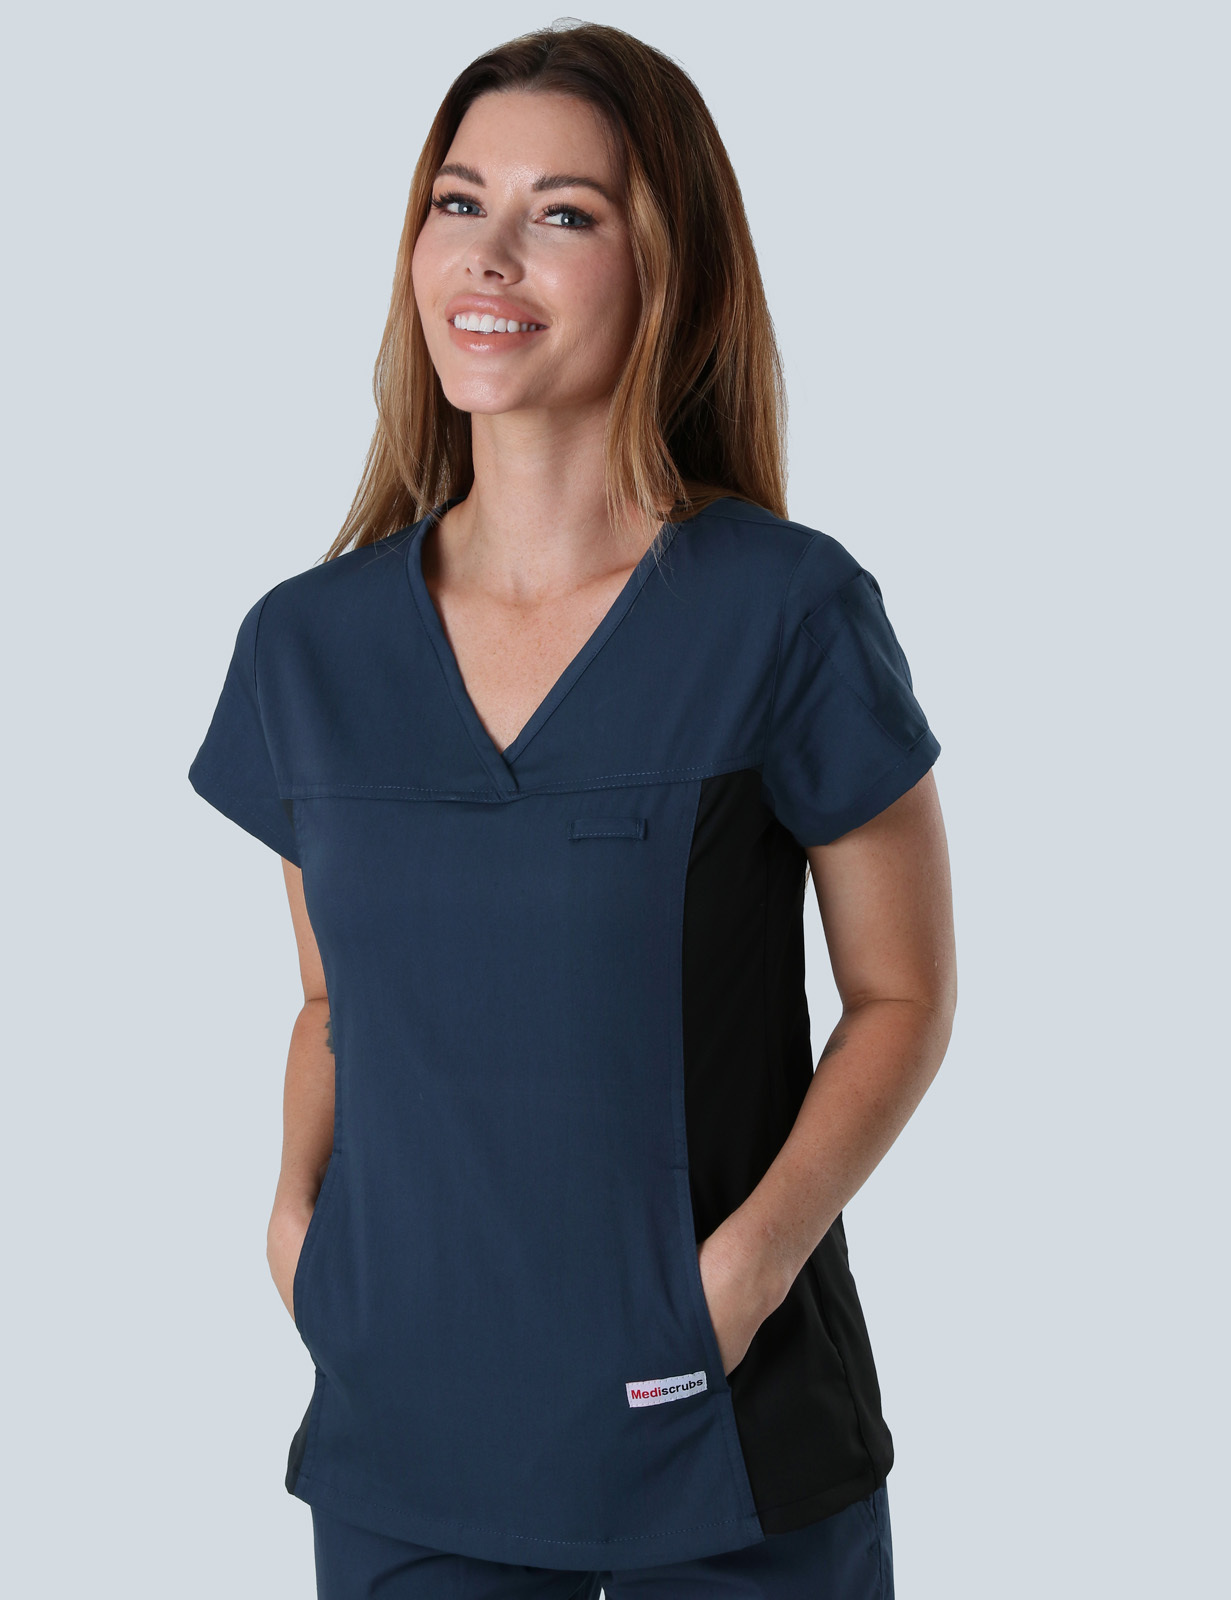 Women's Fit Solid Scrub Top With Spandex Panel - Navy - Small